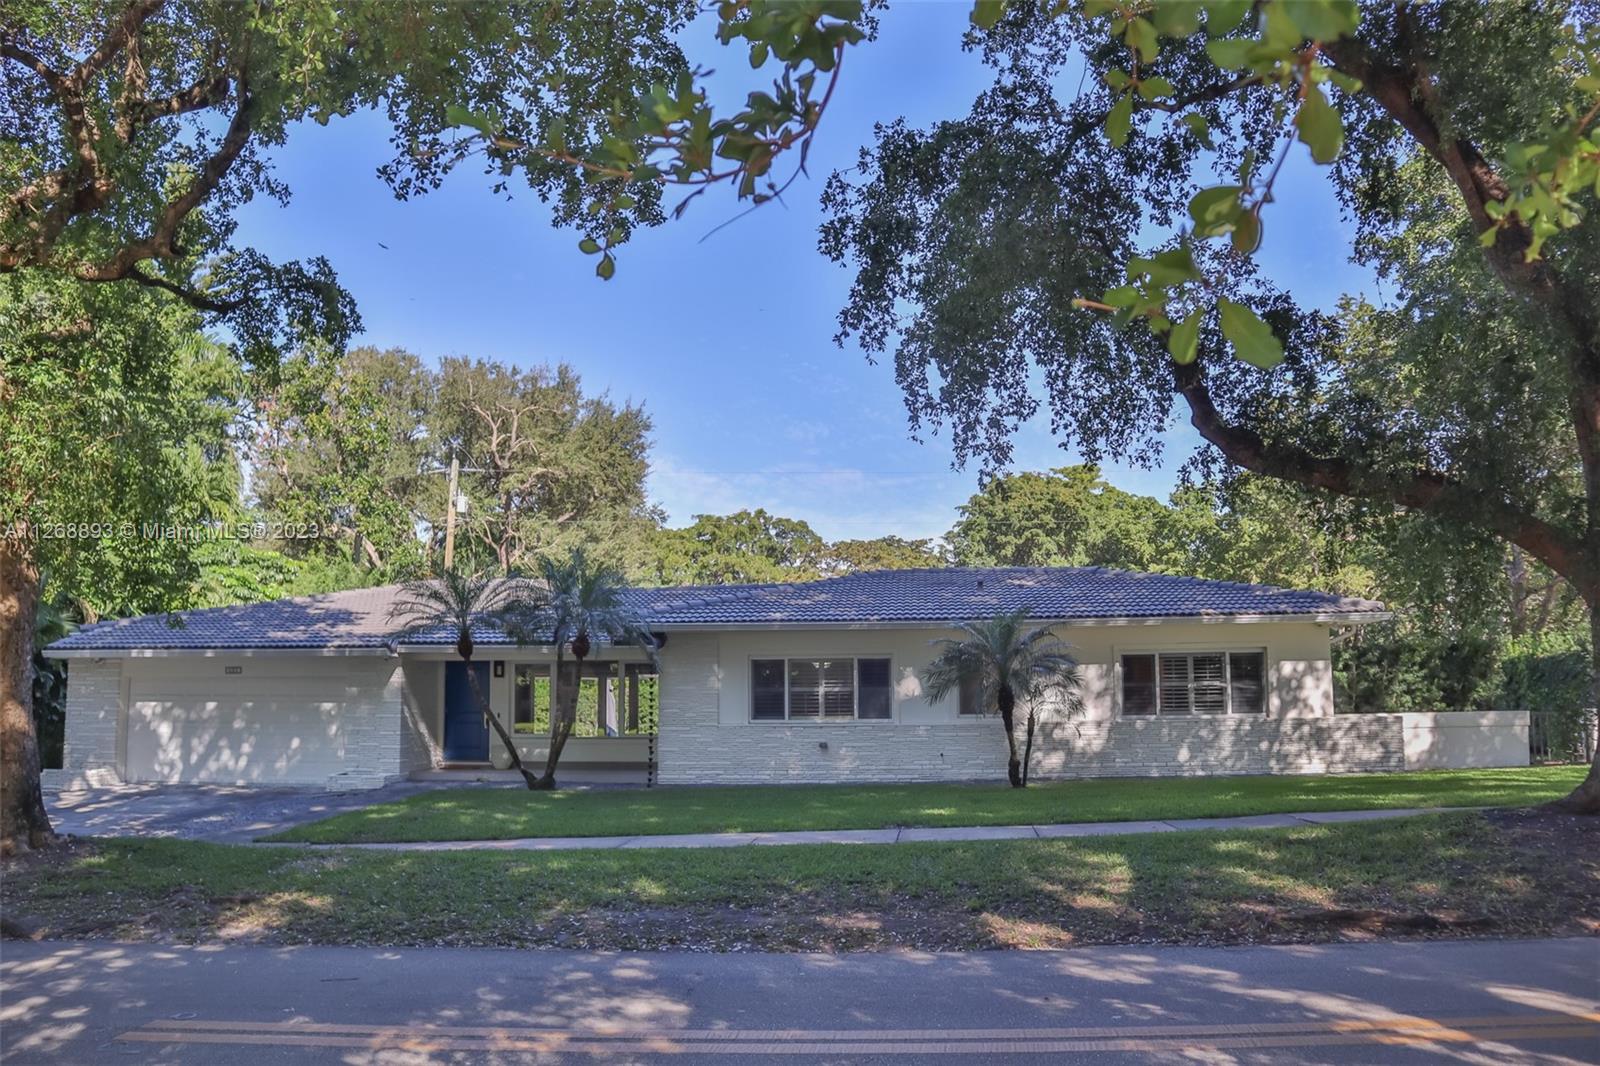 DON'T MISS OUT THIS OPPORTUNITY TO OWN A HIDDEN JEWEL IN THE PRESTIGIOUS PLATINUM TRIANGLE.

THIS IS AN AMAZING CORNER HOME, IS READY TO MOVE IN.
SURROUNDED BY GORGEOUS TREE-LINED CANOPY AND MOST DESIRABLE FAMILY NEIGHBORHOOD, IN THE HEART OF CORAL GABLES.
  
TOTALLY UPDATED 3 BEDROOM, 3 BATHROOM, 1 Half BATHROOM , ACTUAL AREA : 2,568.00 Sq.Ft.
A HUGE TWO CAR GARAGE WITH LOTS OF STORAGE SPACE. 
MODERN SOCIAL SPACE READY TO ENTERTAIN : FORMAL LIVING, DINING AND FAMILY ROOM.

THIS HOME IS LOCATED NEXT TO: A+ SCHOOLS, COCOPLUM, GABLES WATERWAYS, COCONUT GROVE, MATHESON HAMMOCK PARK & MARINA, SOUTH MIAMI, FAIRCHILD TROPICAL BOTANIC GARDEN , SOUTH MIAMI, AND MUCH MORE......